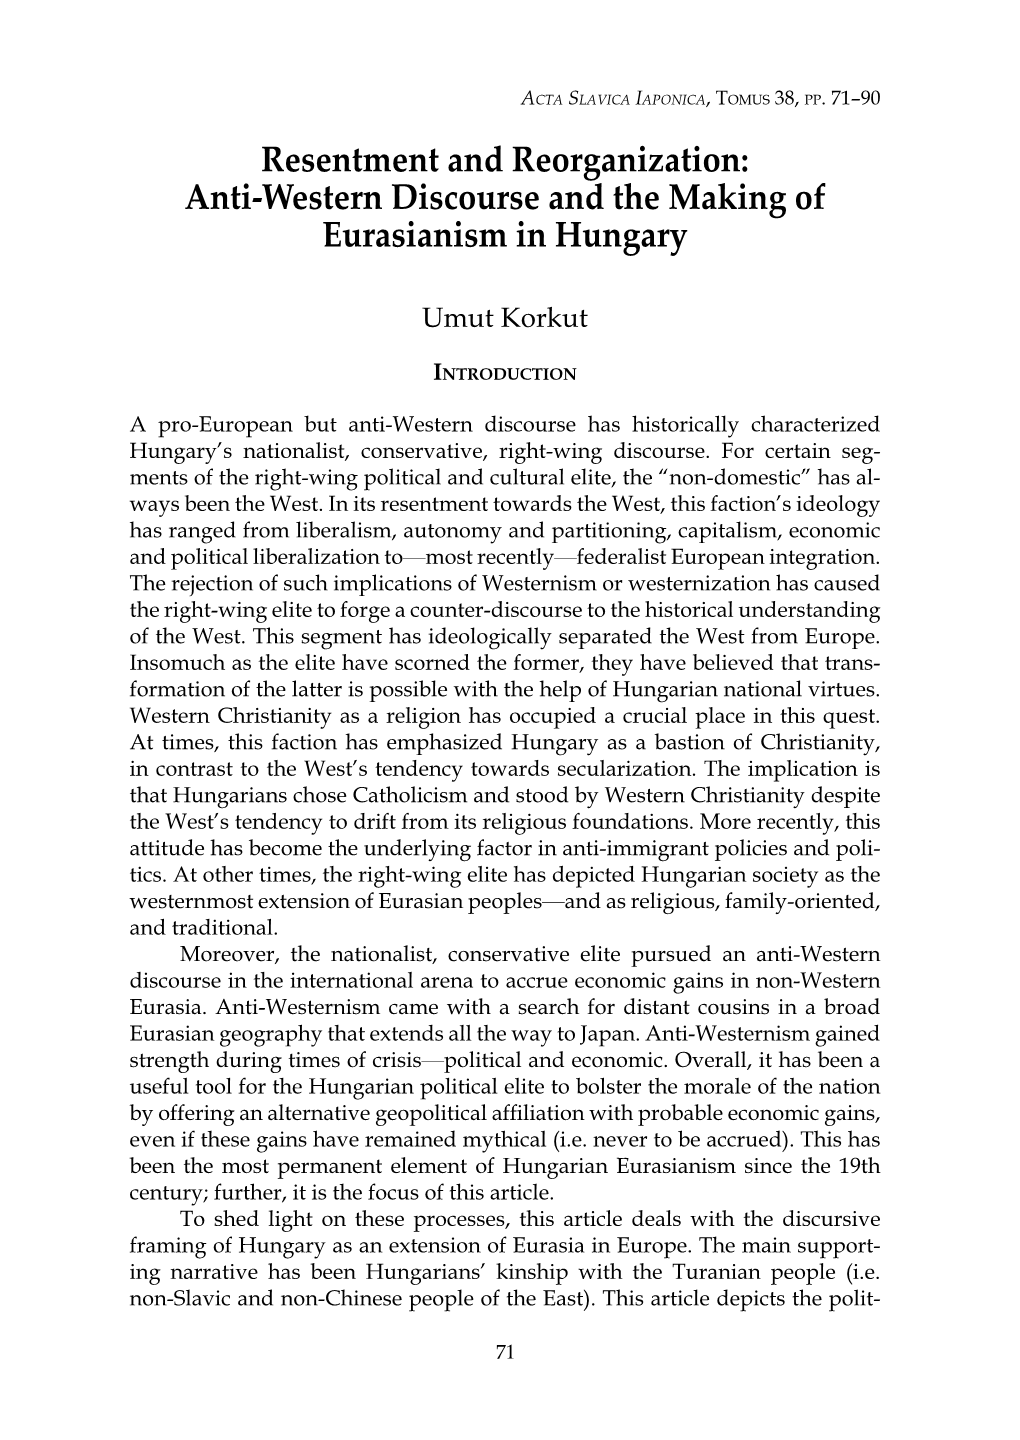 Anti-Western Discourse and the Making of Eurasianism in Hungary